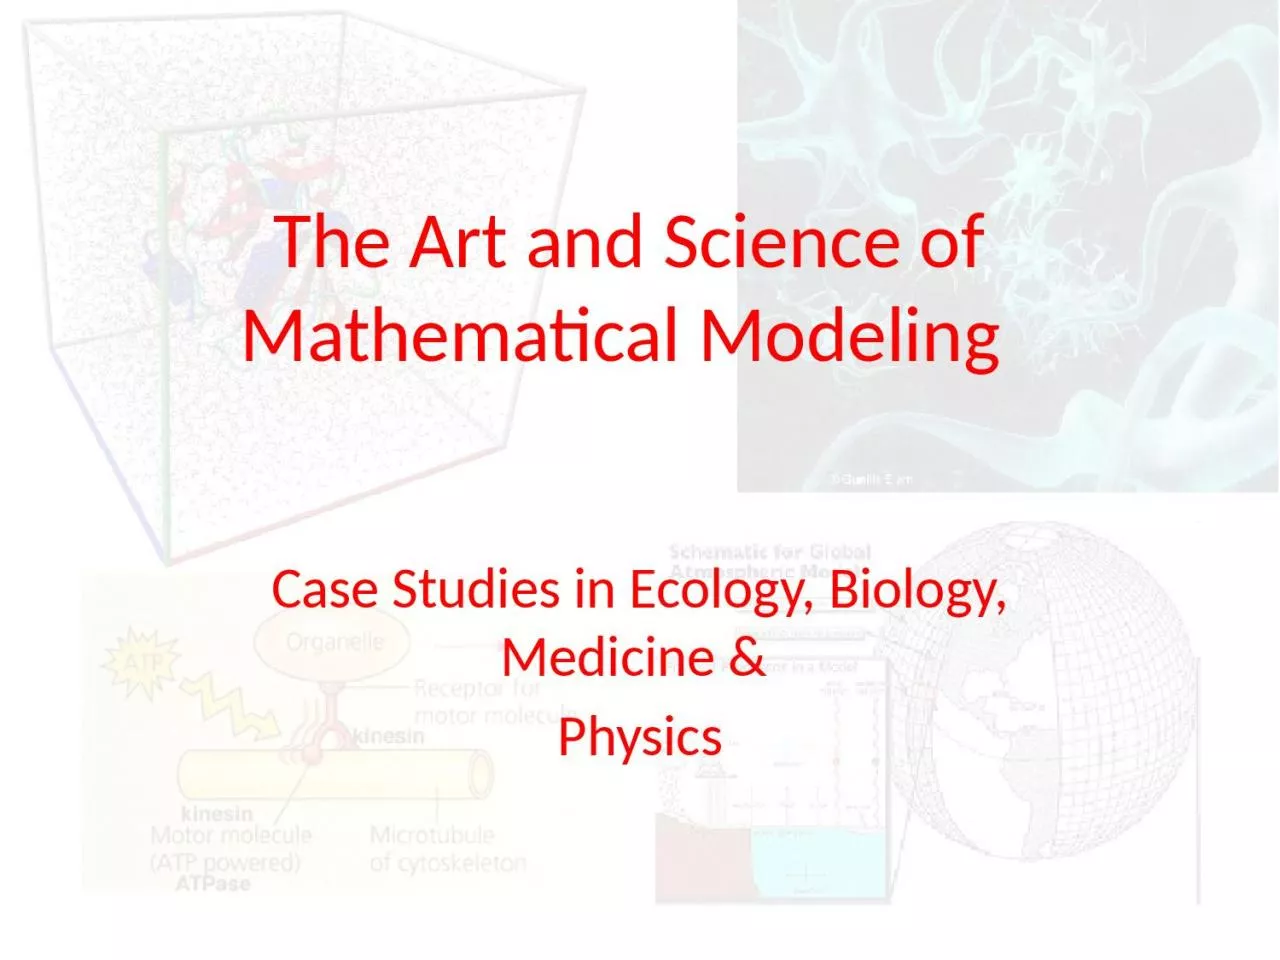 The Art and Science of Mathematical Modeling